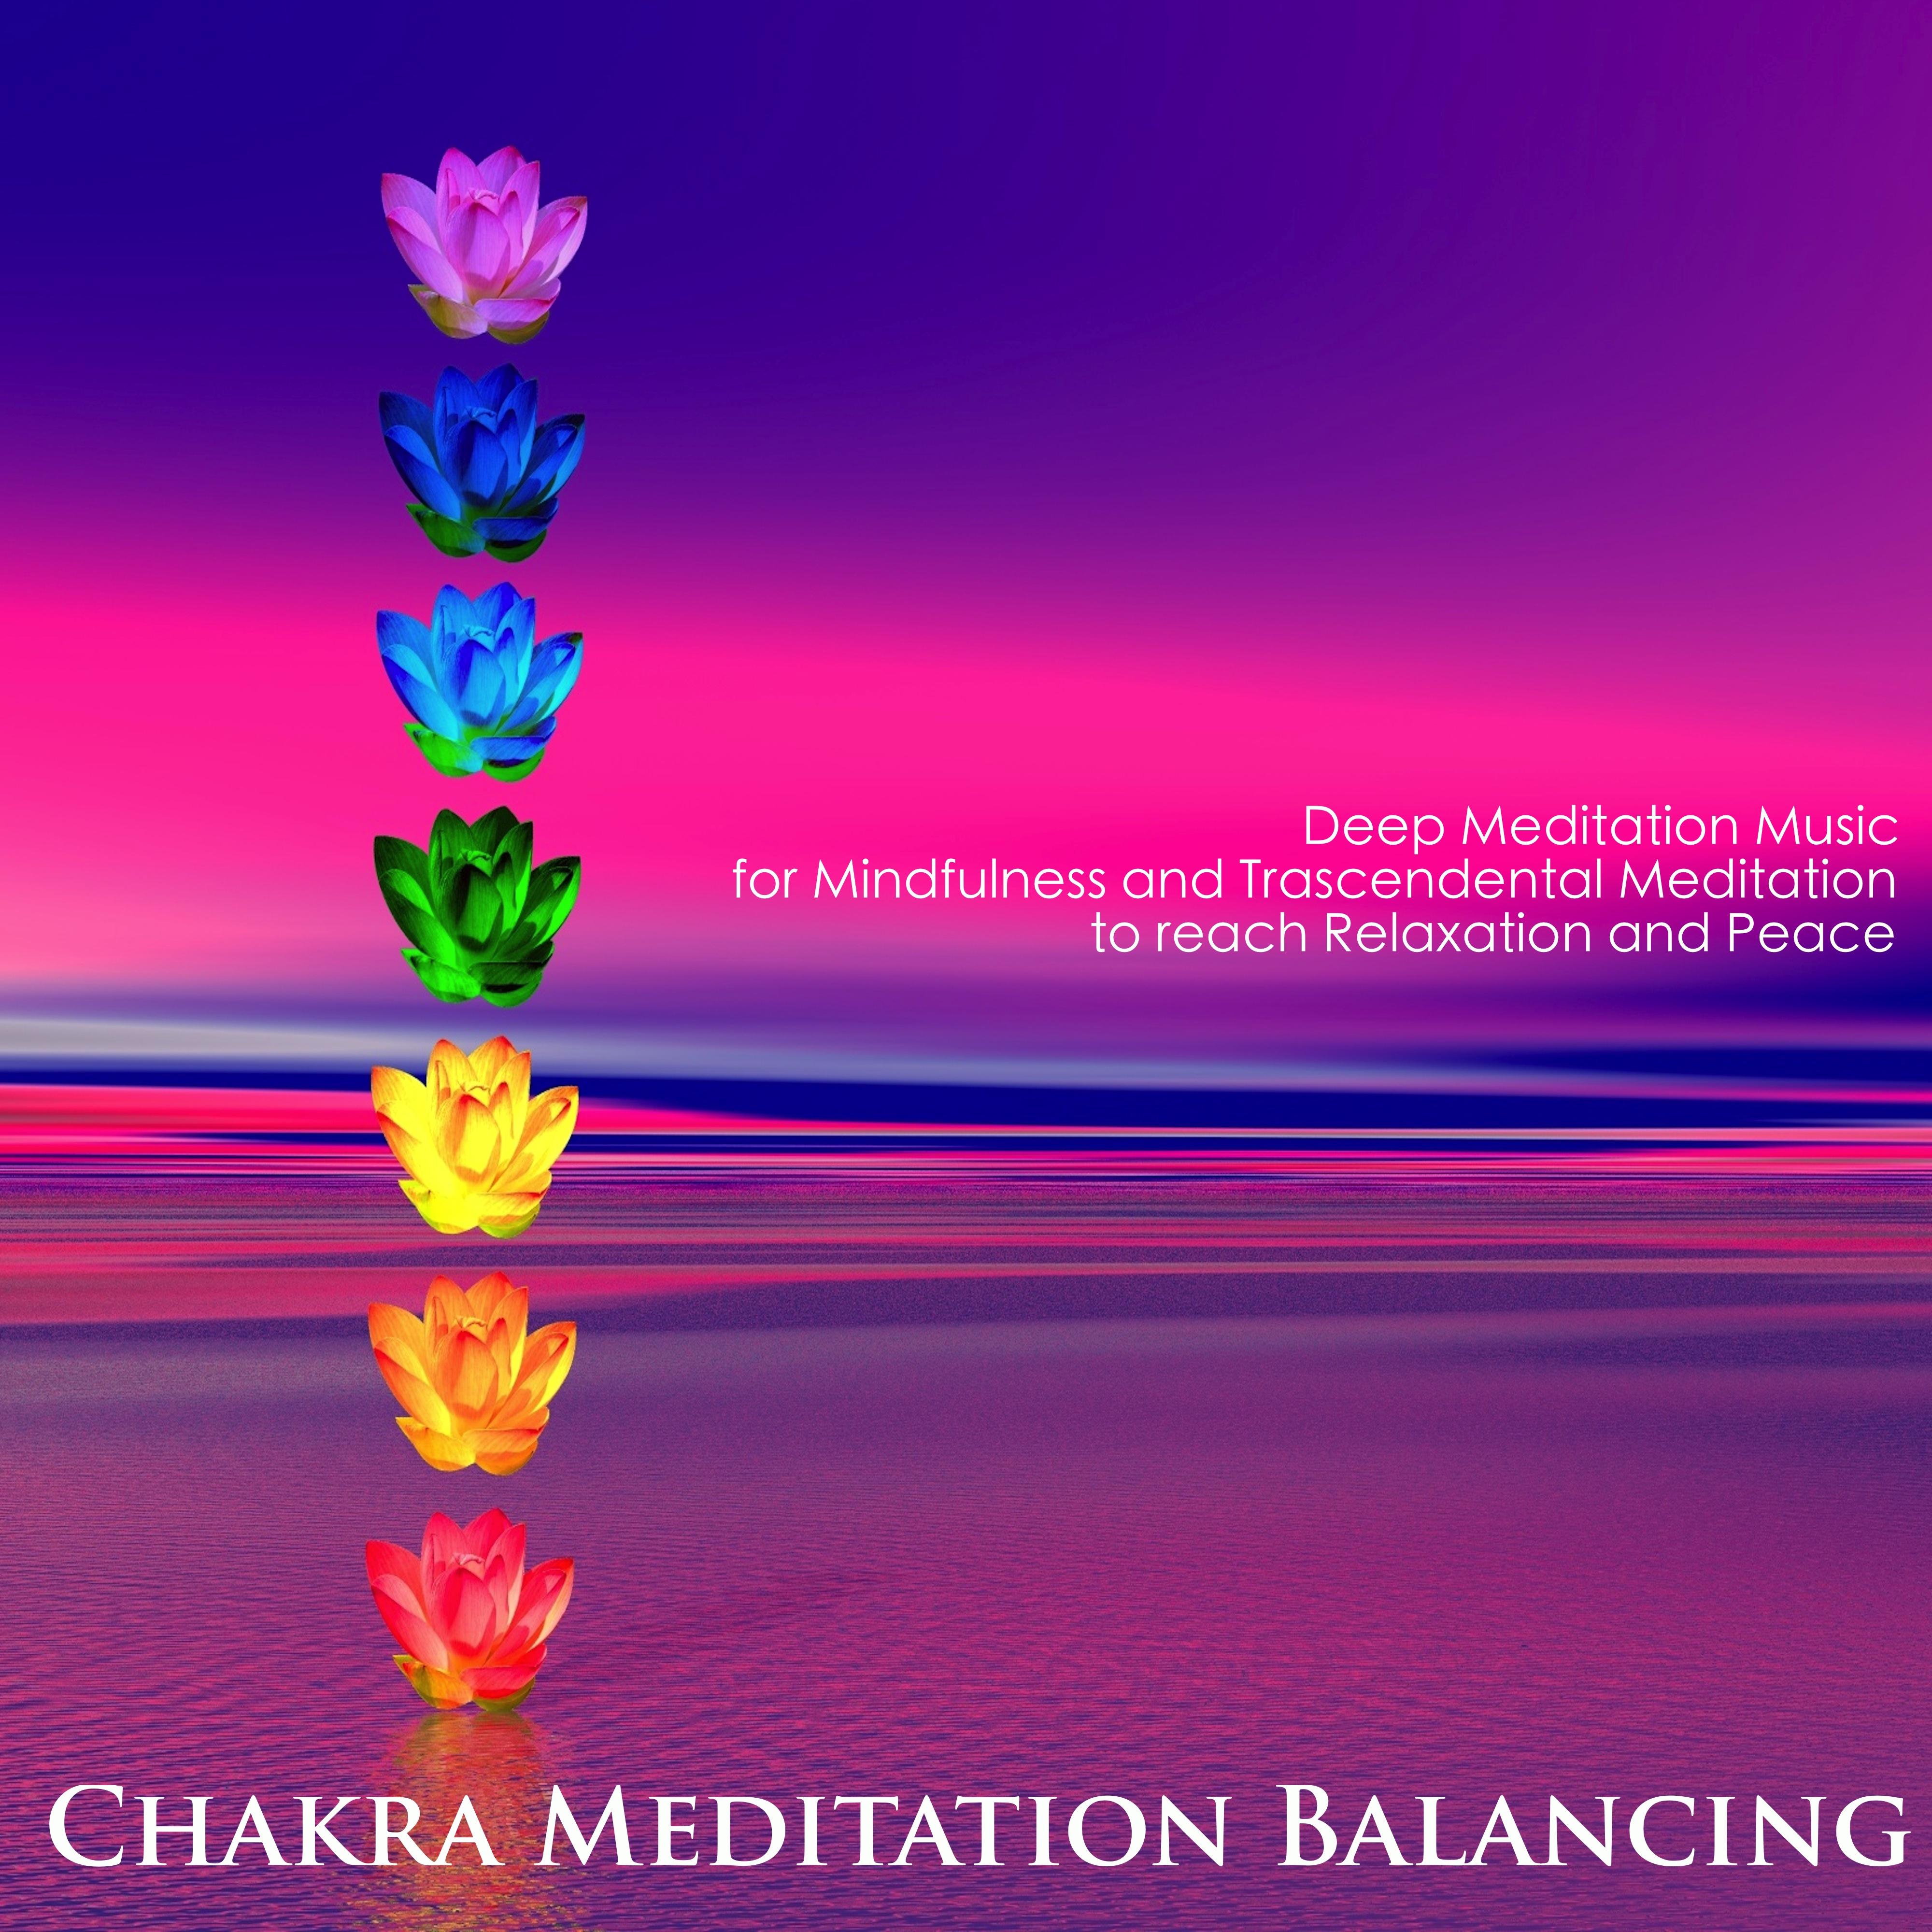 Chakra Meditation Balancing - Deep Meditation Music for Mindfulness and Trascendental Meditation to Reach Relaxation and Peace